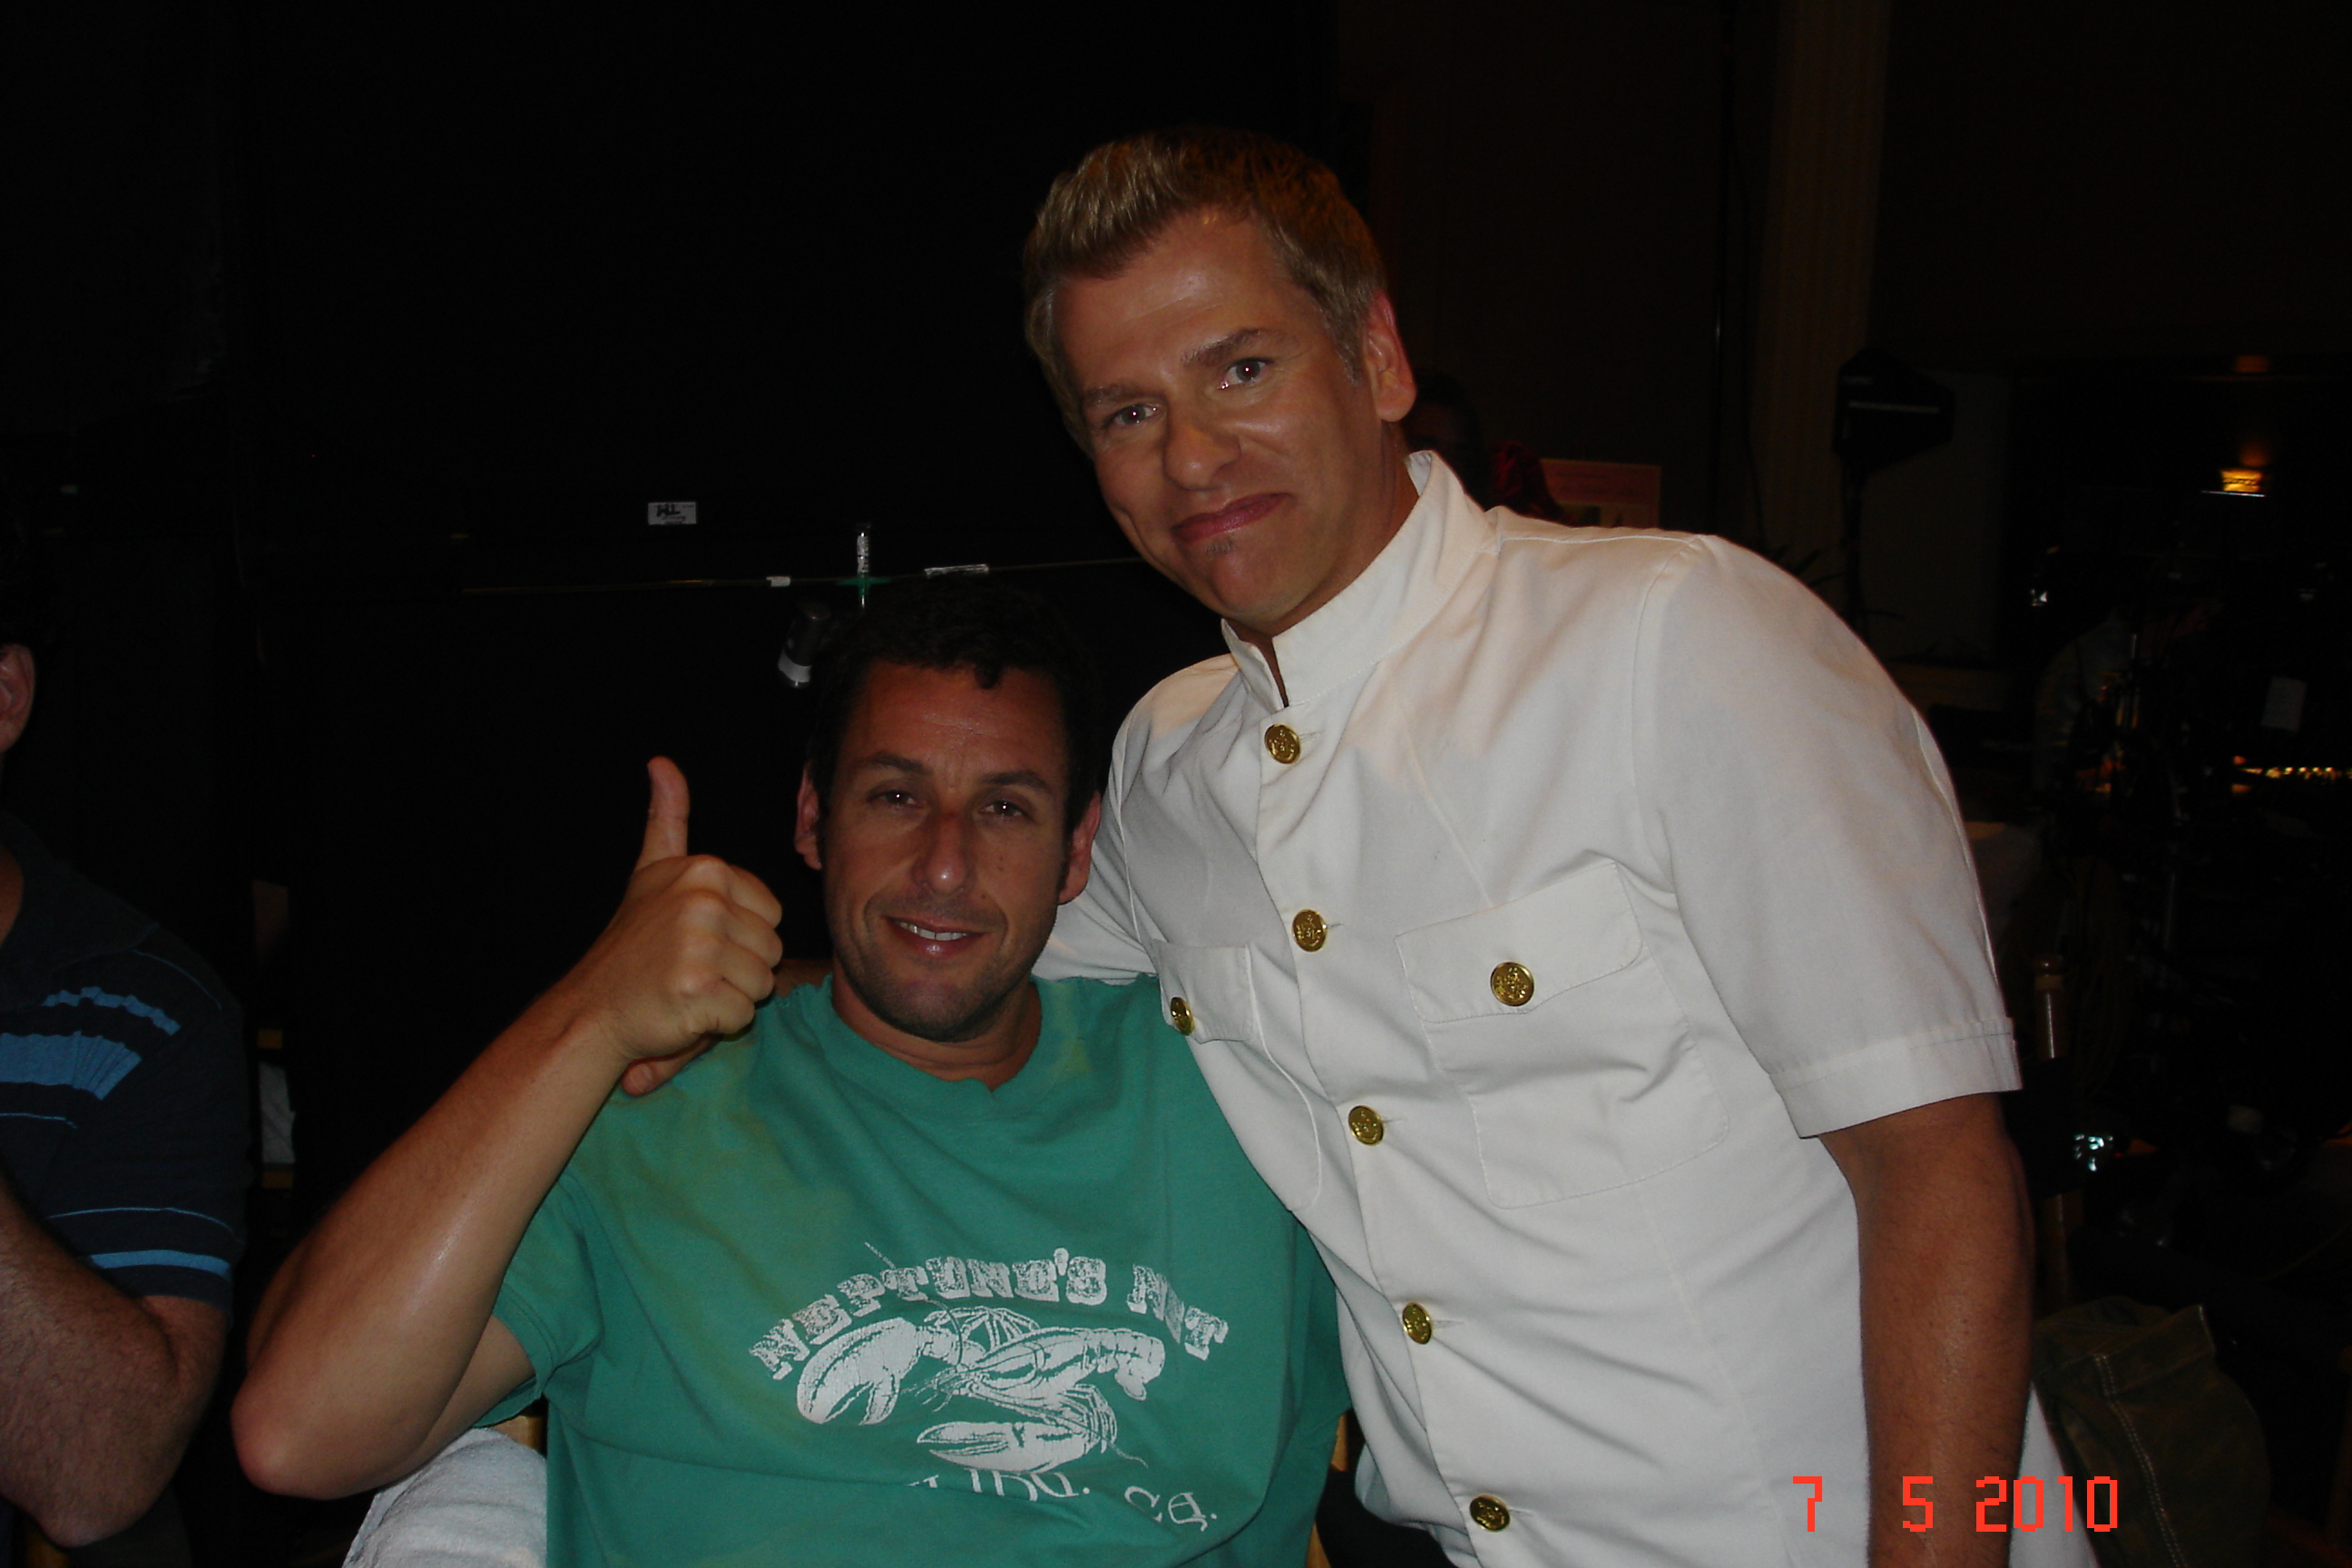 With Adam Sandler while filming JUST GO WITH IT in Maui.